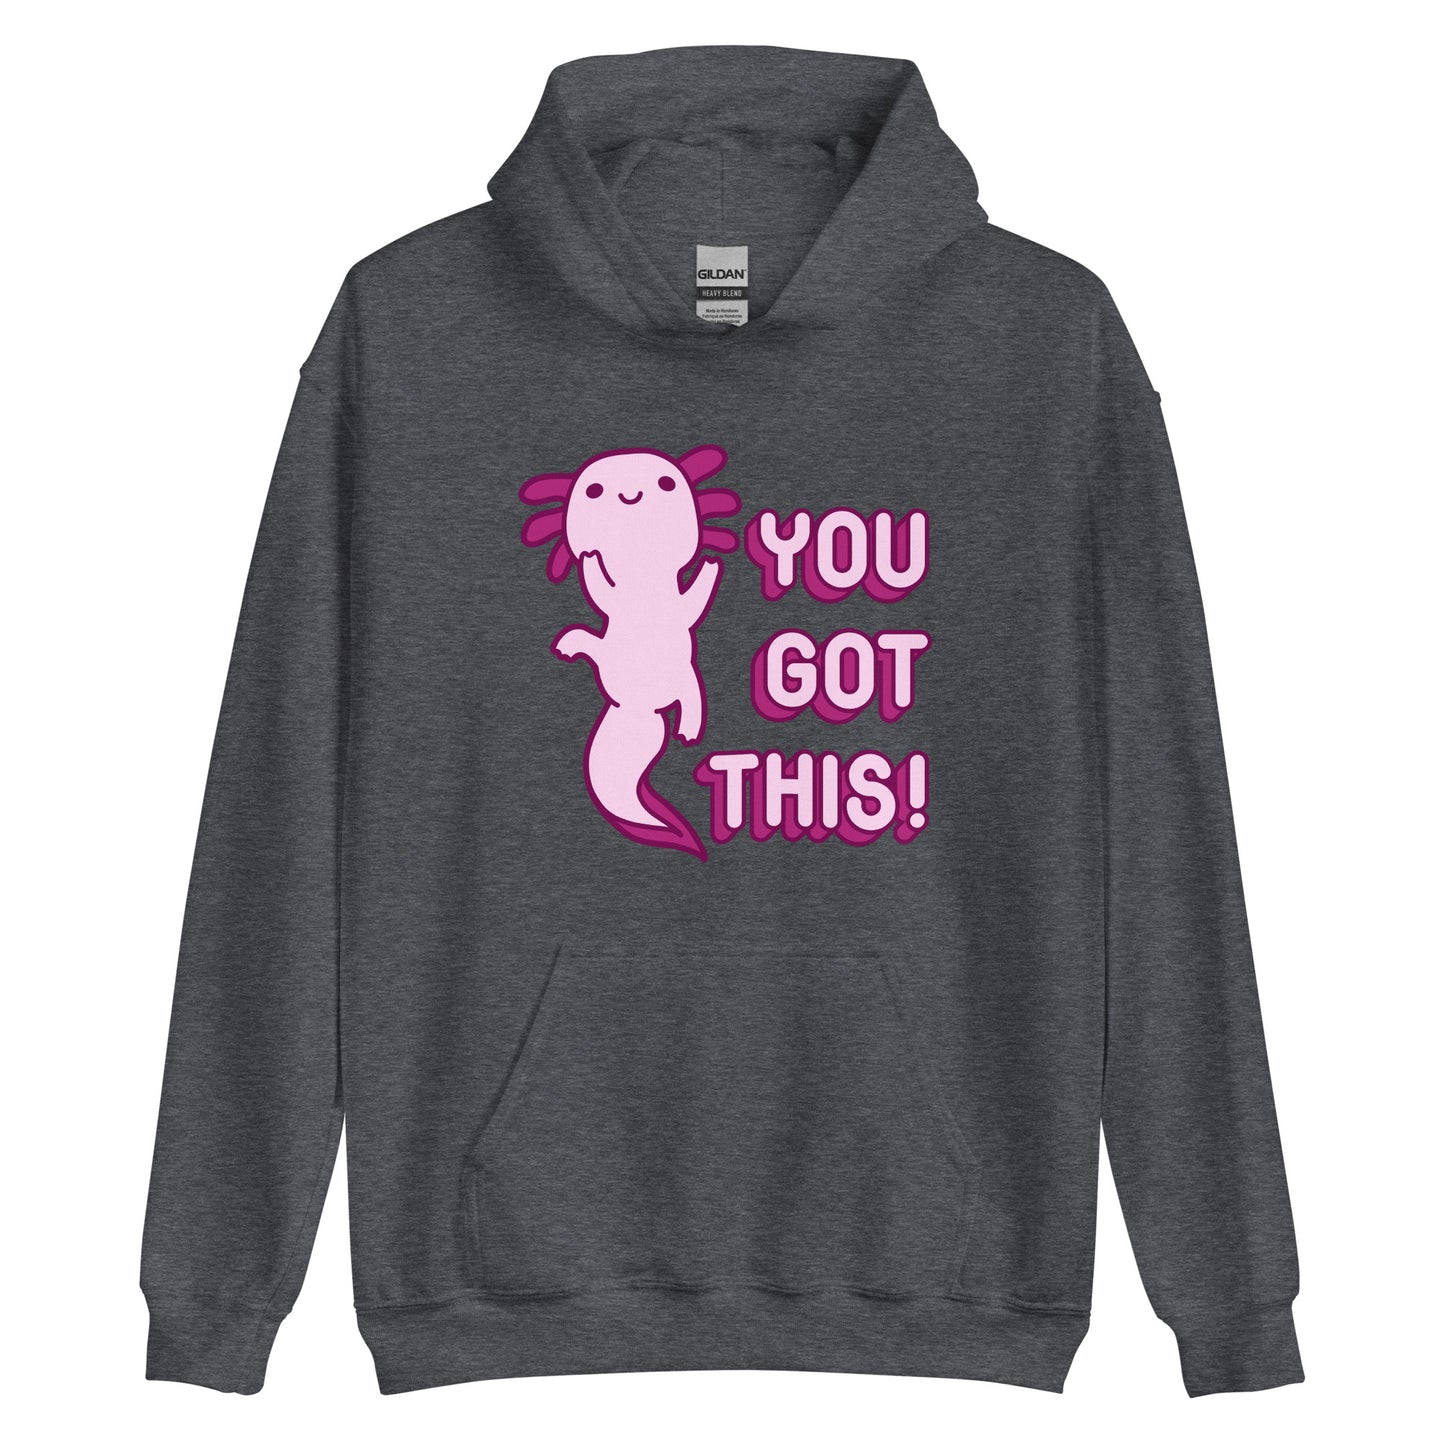 A heather gray hooded sweatshirt with front pouch pocket featuring a picture of a pink axolotl and text reading "You Got This!" in pink bubble letters